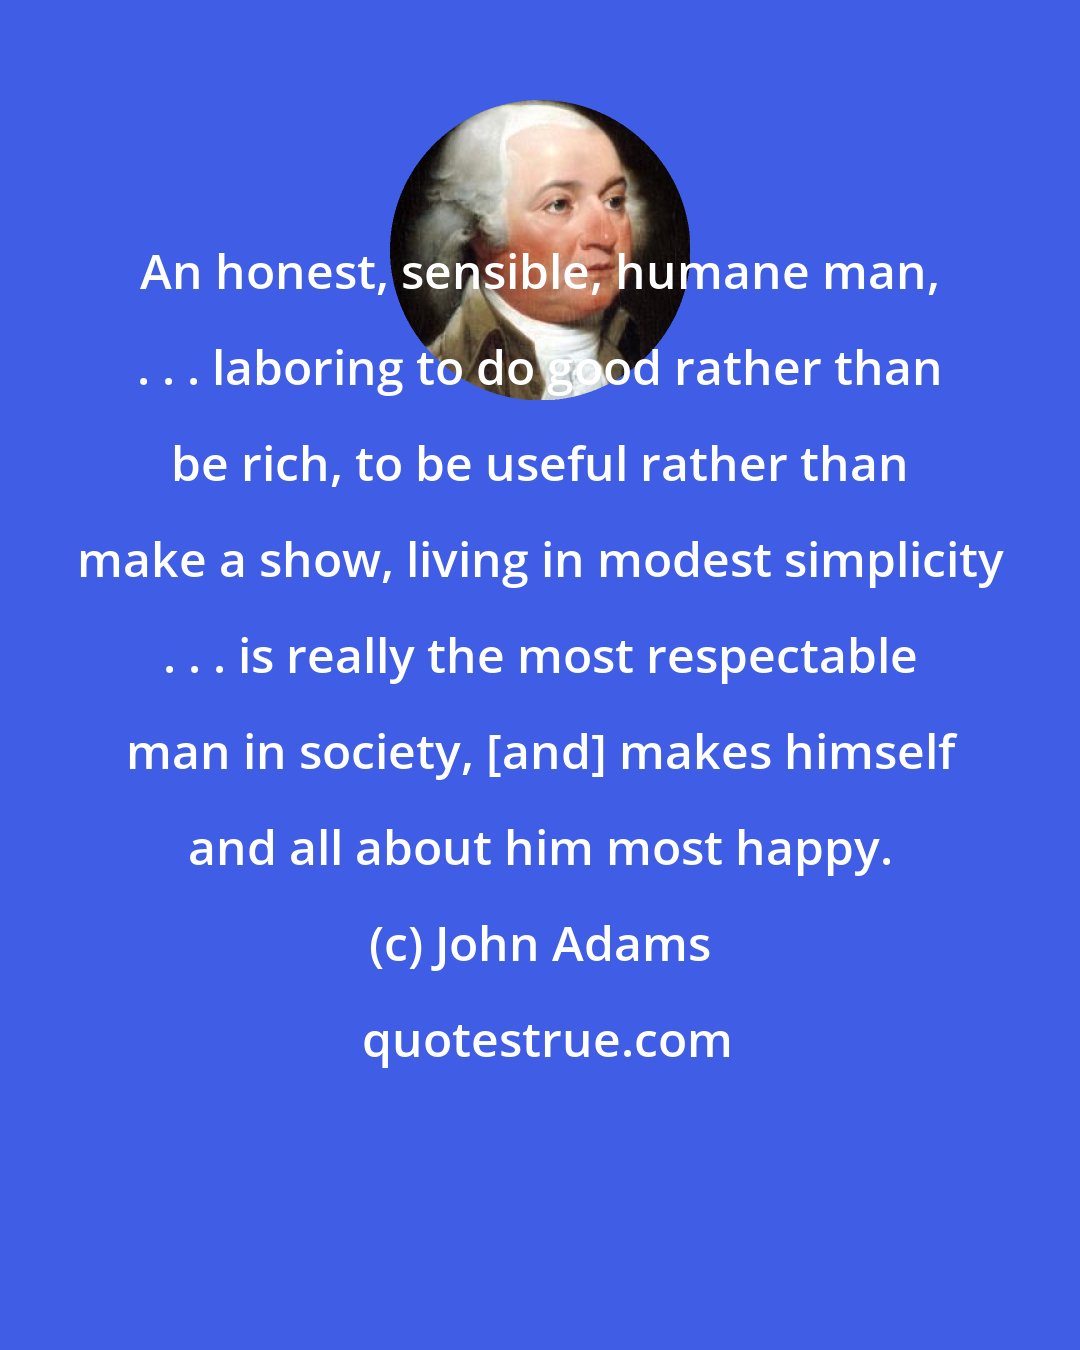 John Adams: An honest, sensible, humane man, . . . laboring to do good rather than be rich, to be useful rather than make a show, living in modest simplicity . . . is really the most respectable man in society, [and] makes himself and all about him most happy.